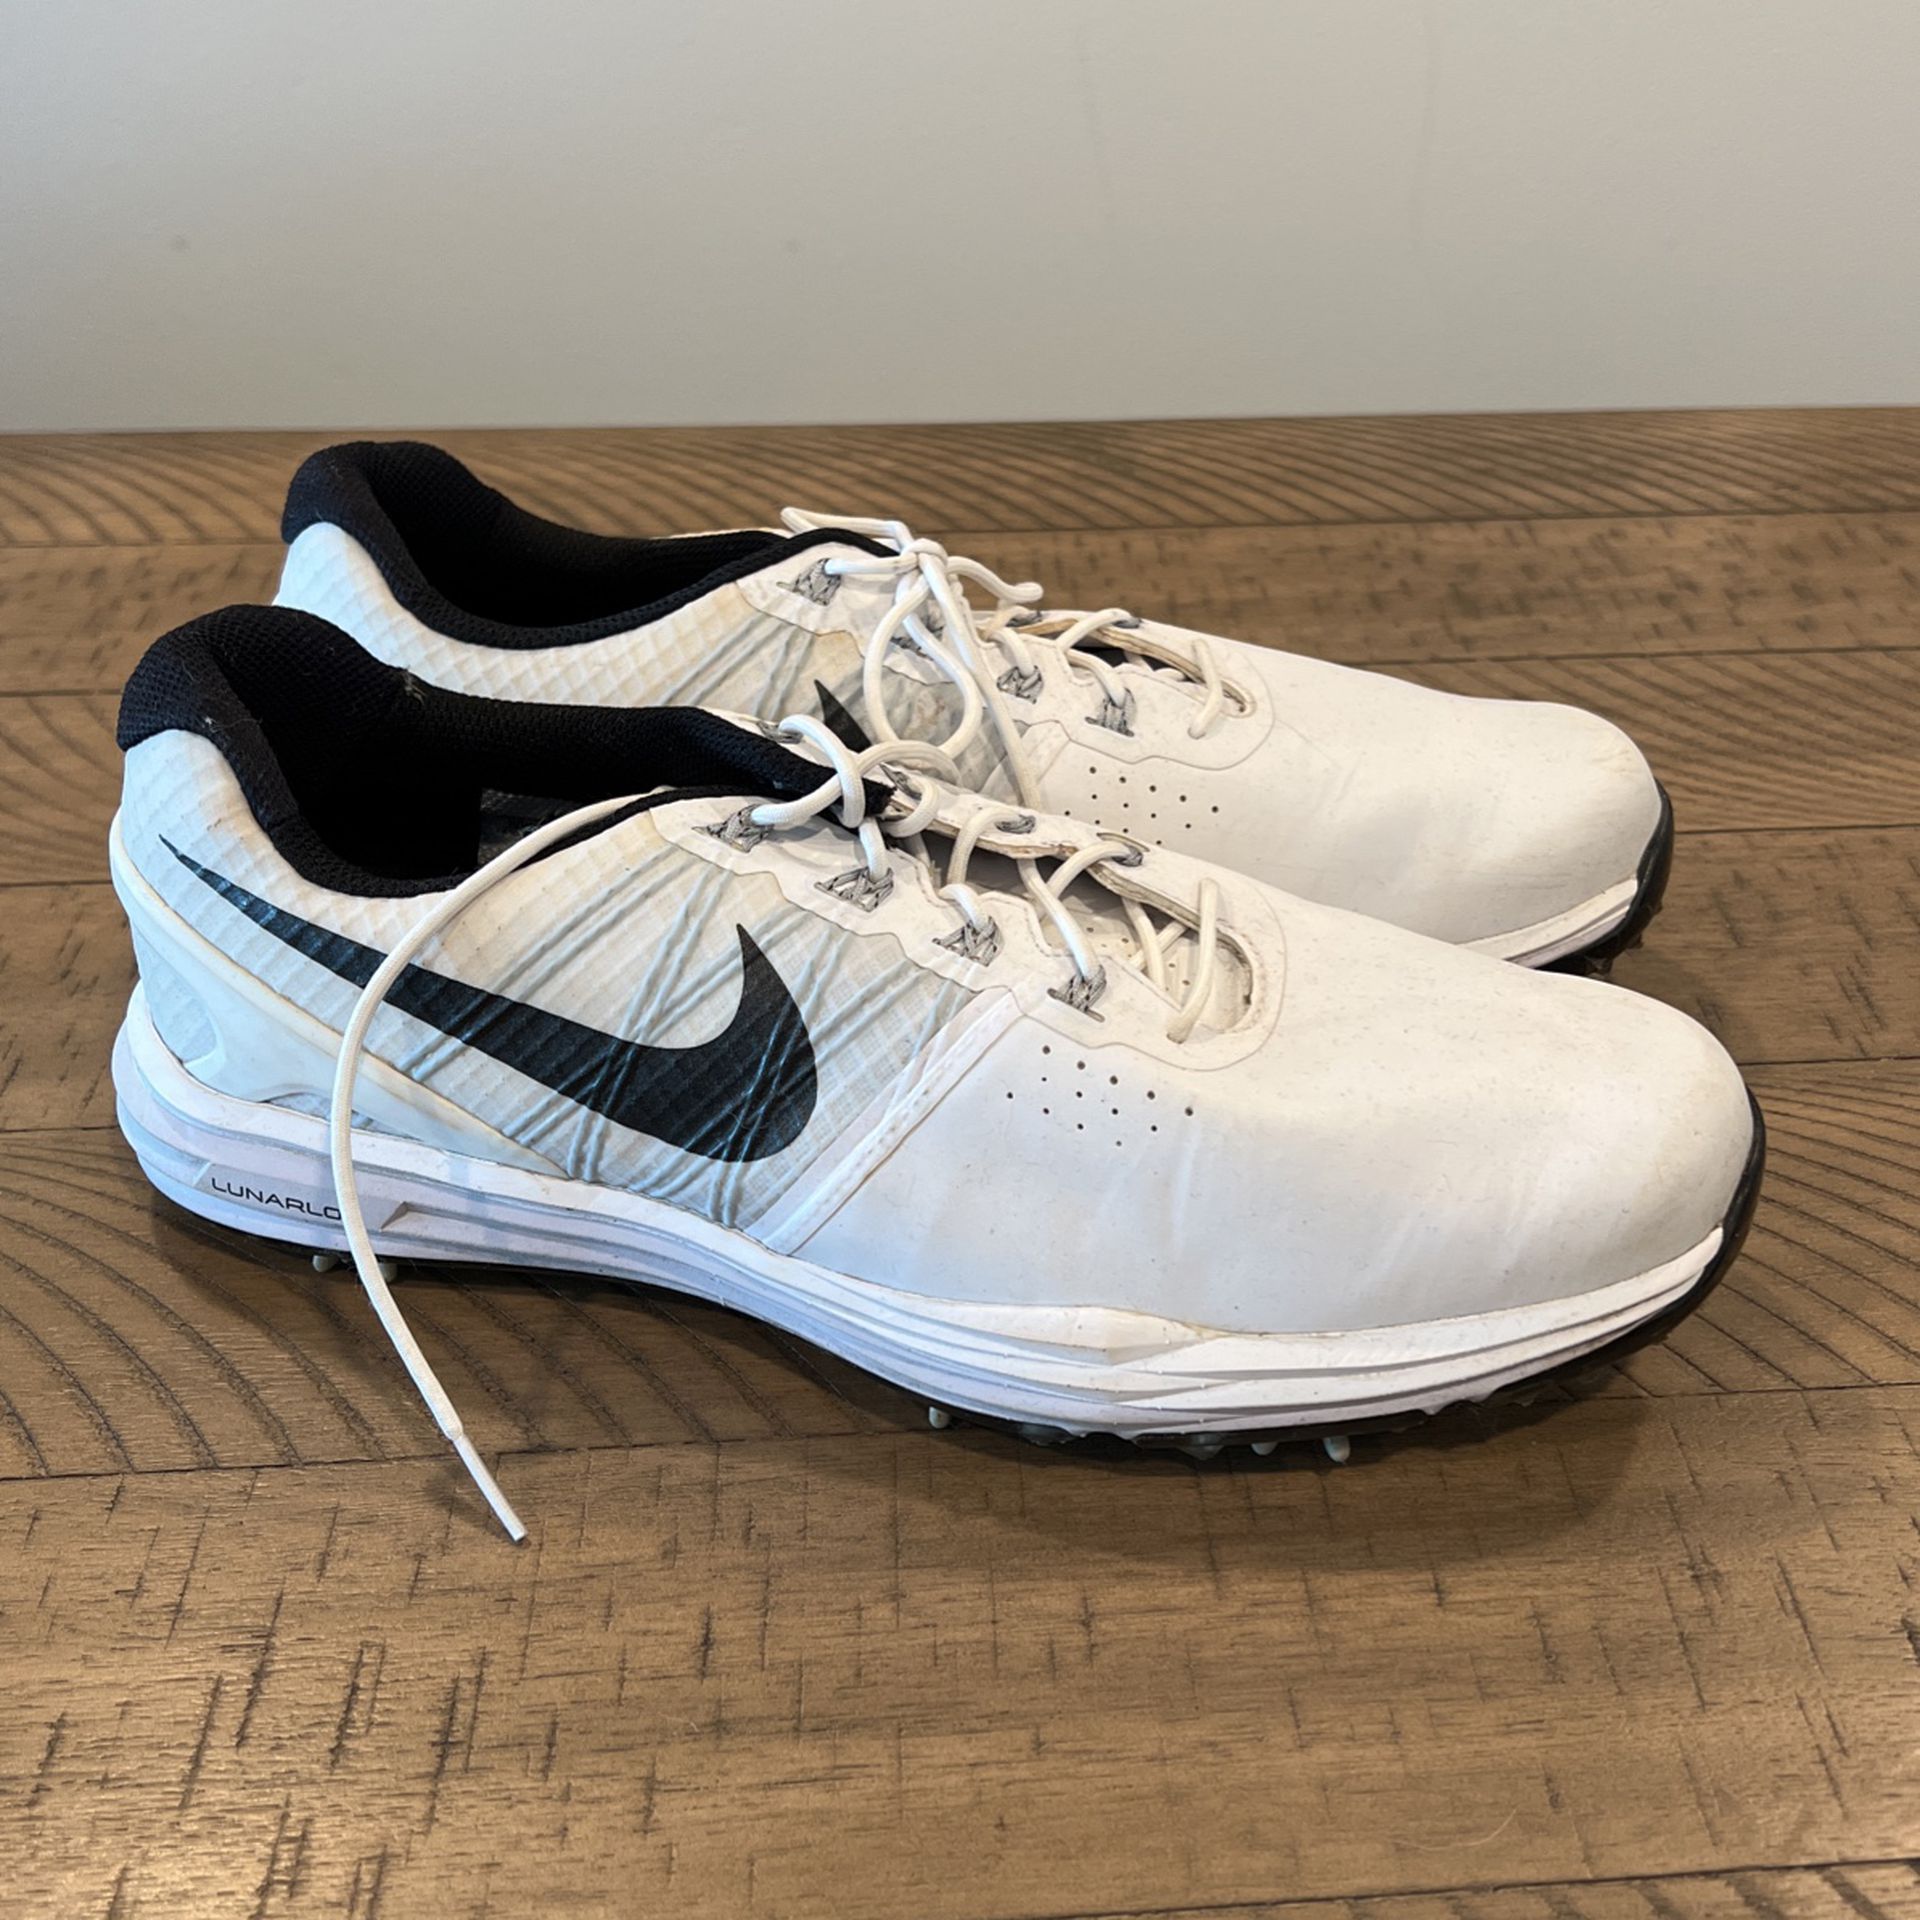 Nike Lunar Control Golf Shoes 10.5 for Sale in Los Angeles, CA - OfferUp